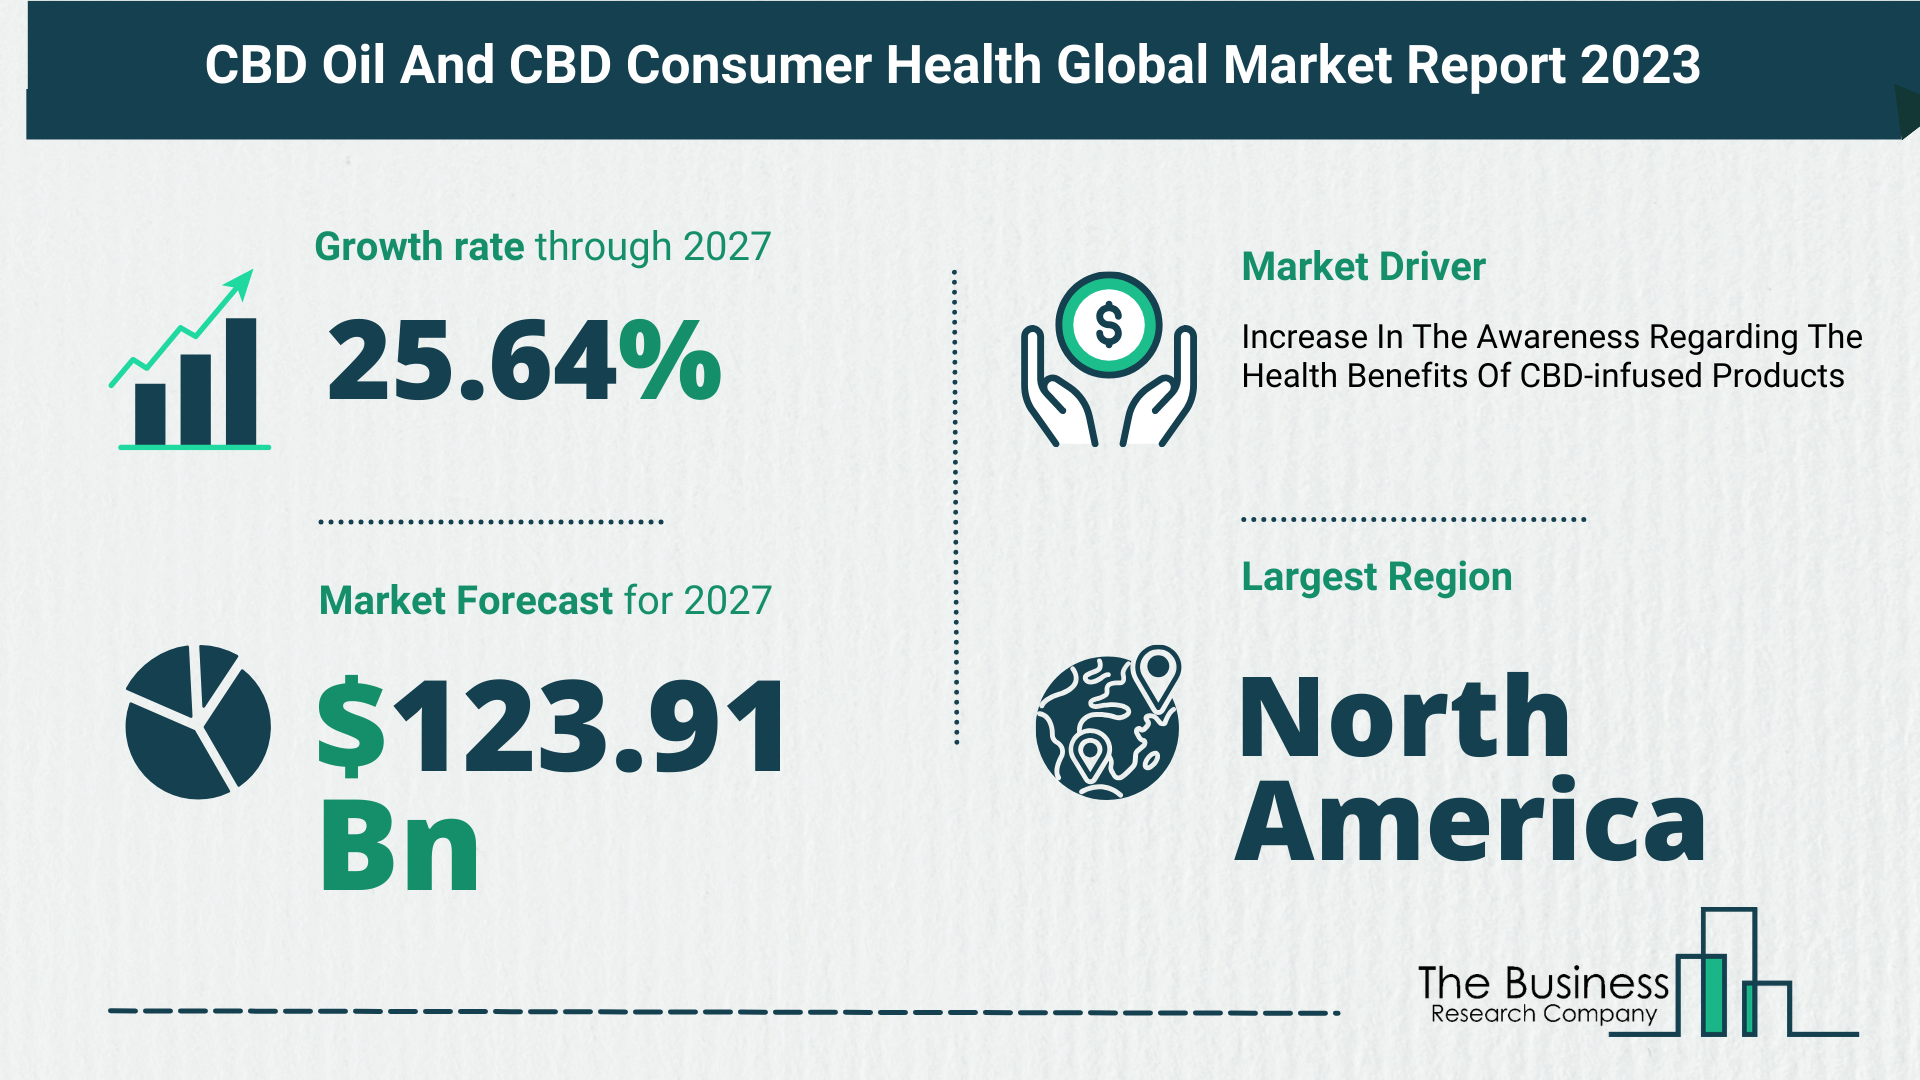 Overview Of The CBD Oil And CBD Consumer Health Market 2023: Size, Drivers, And Trends